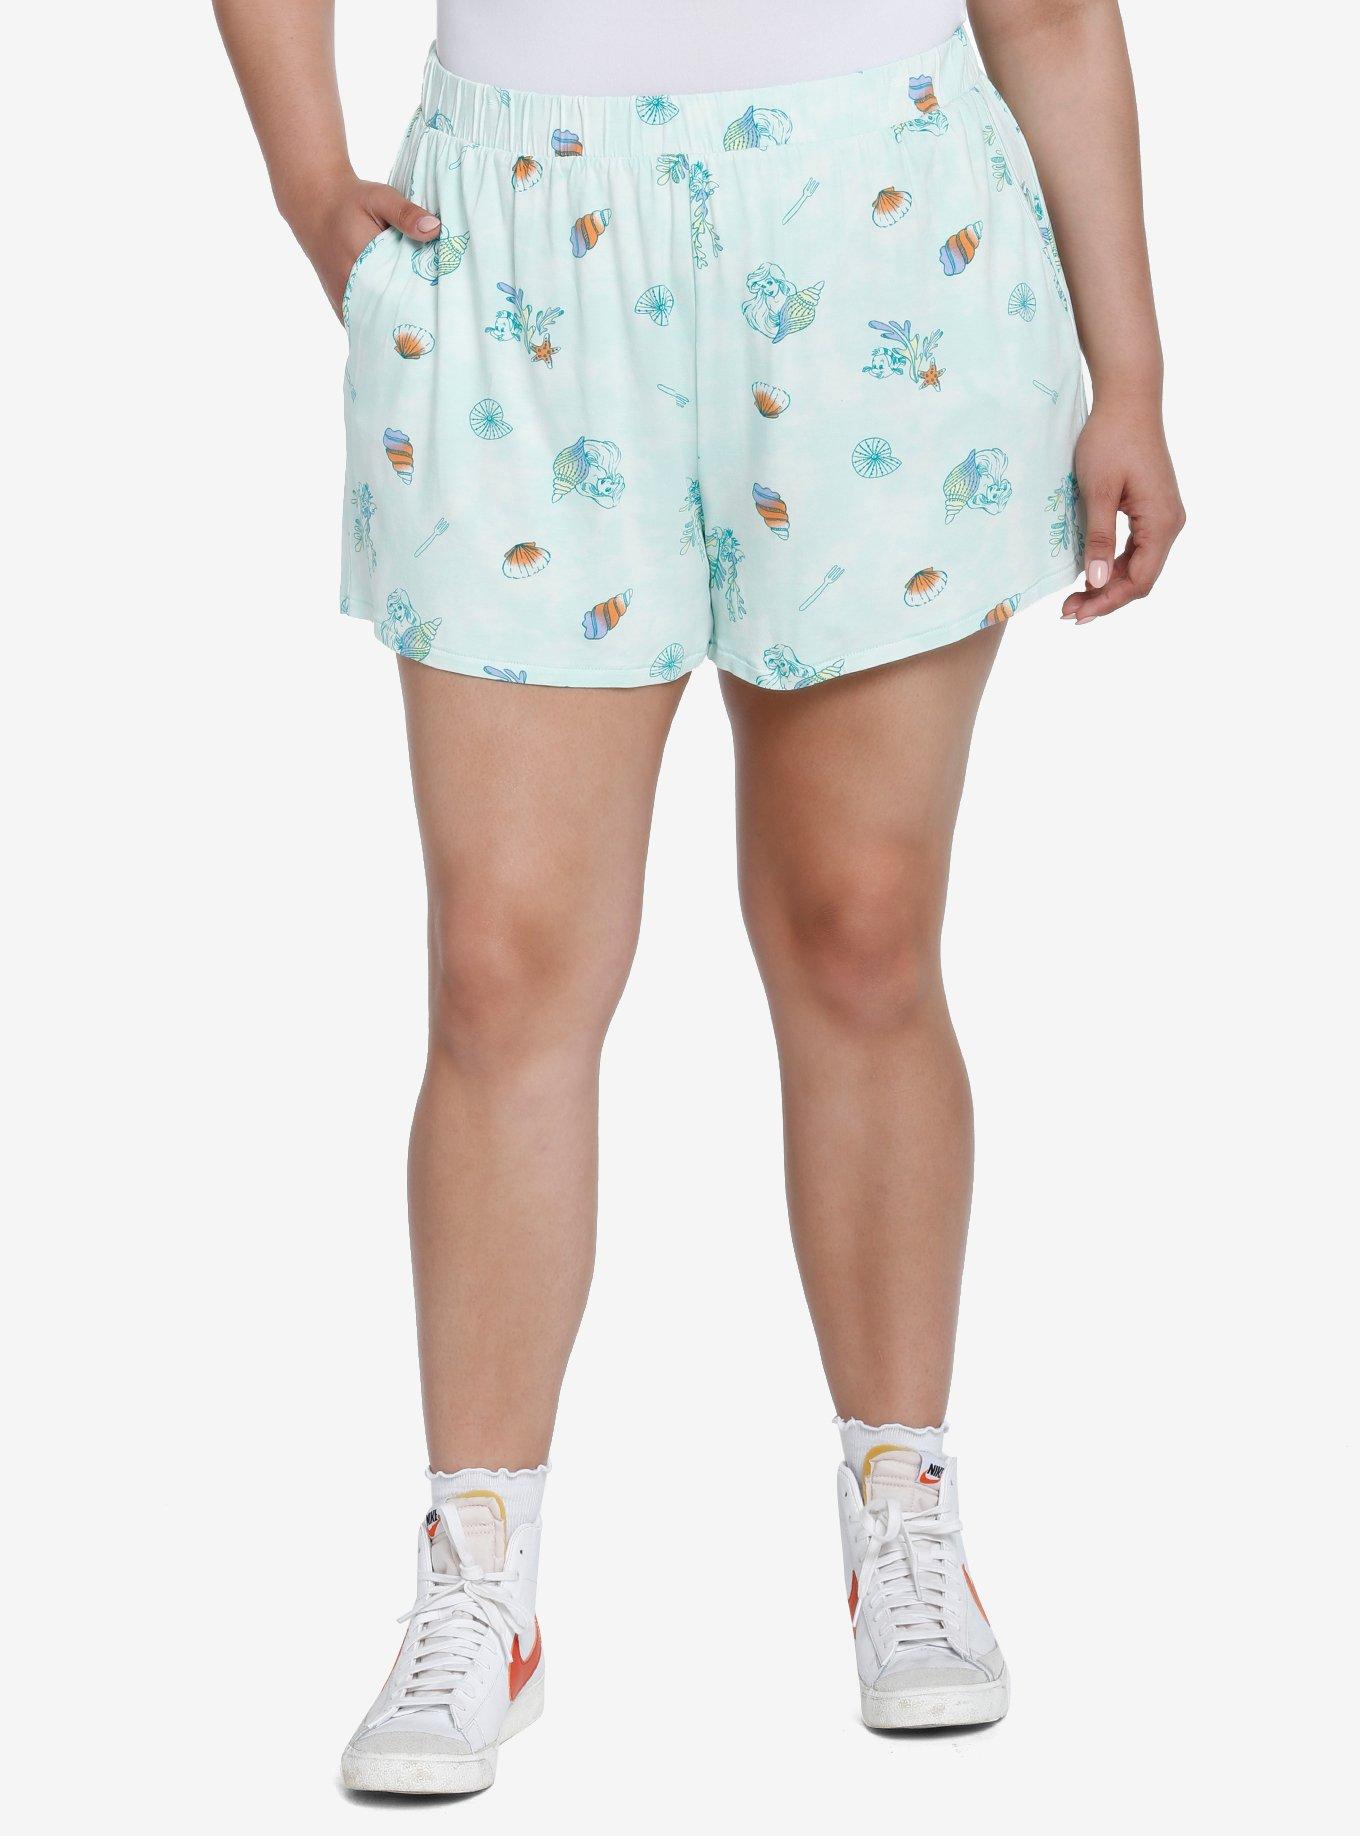 Her Universe Disney The Little Mermaid Icons Lounge Shorts Plus Size Her Universe Exclusive, , hi-res